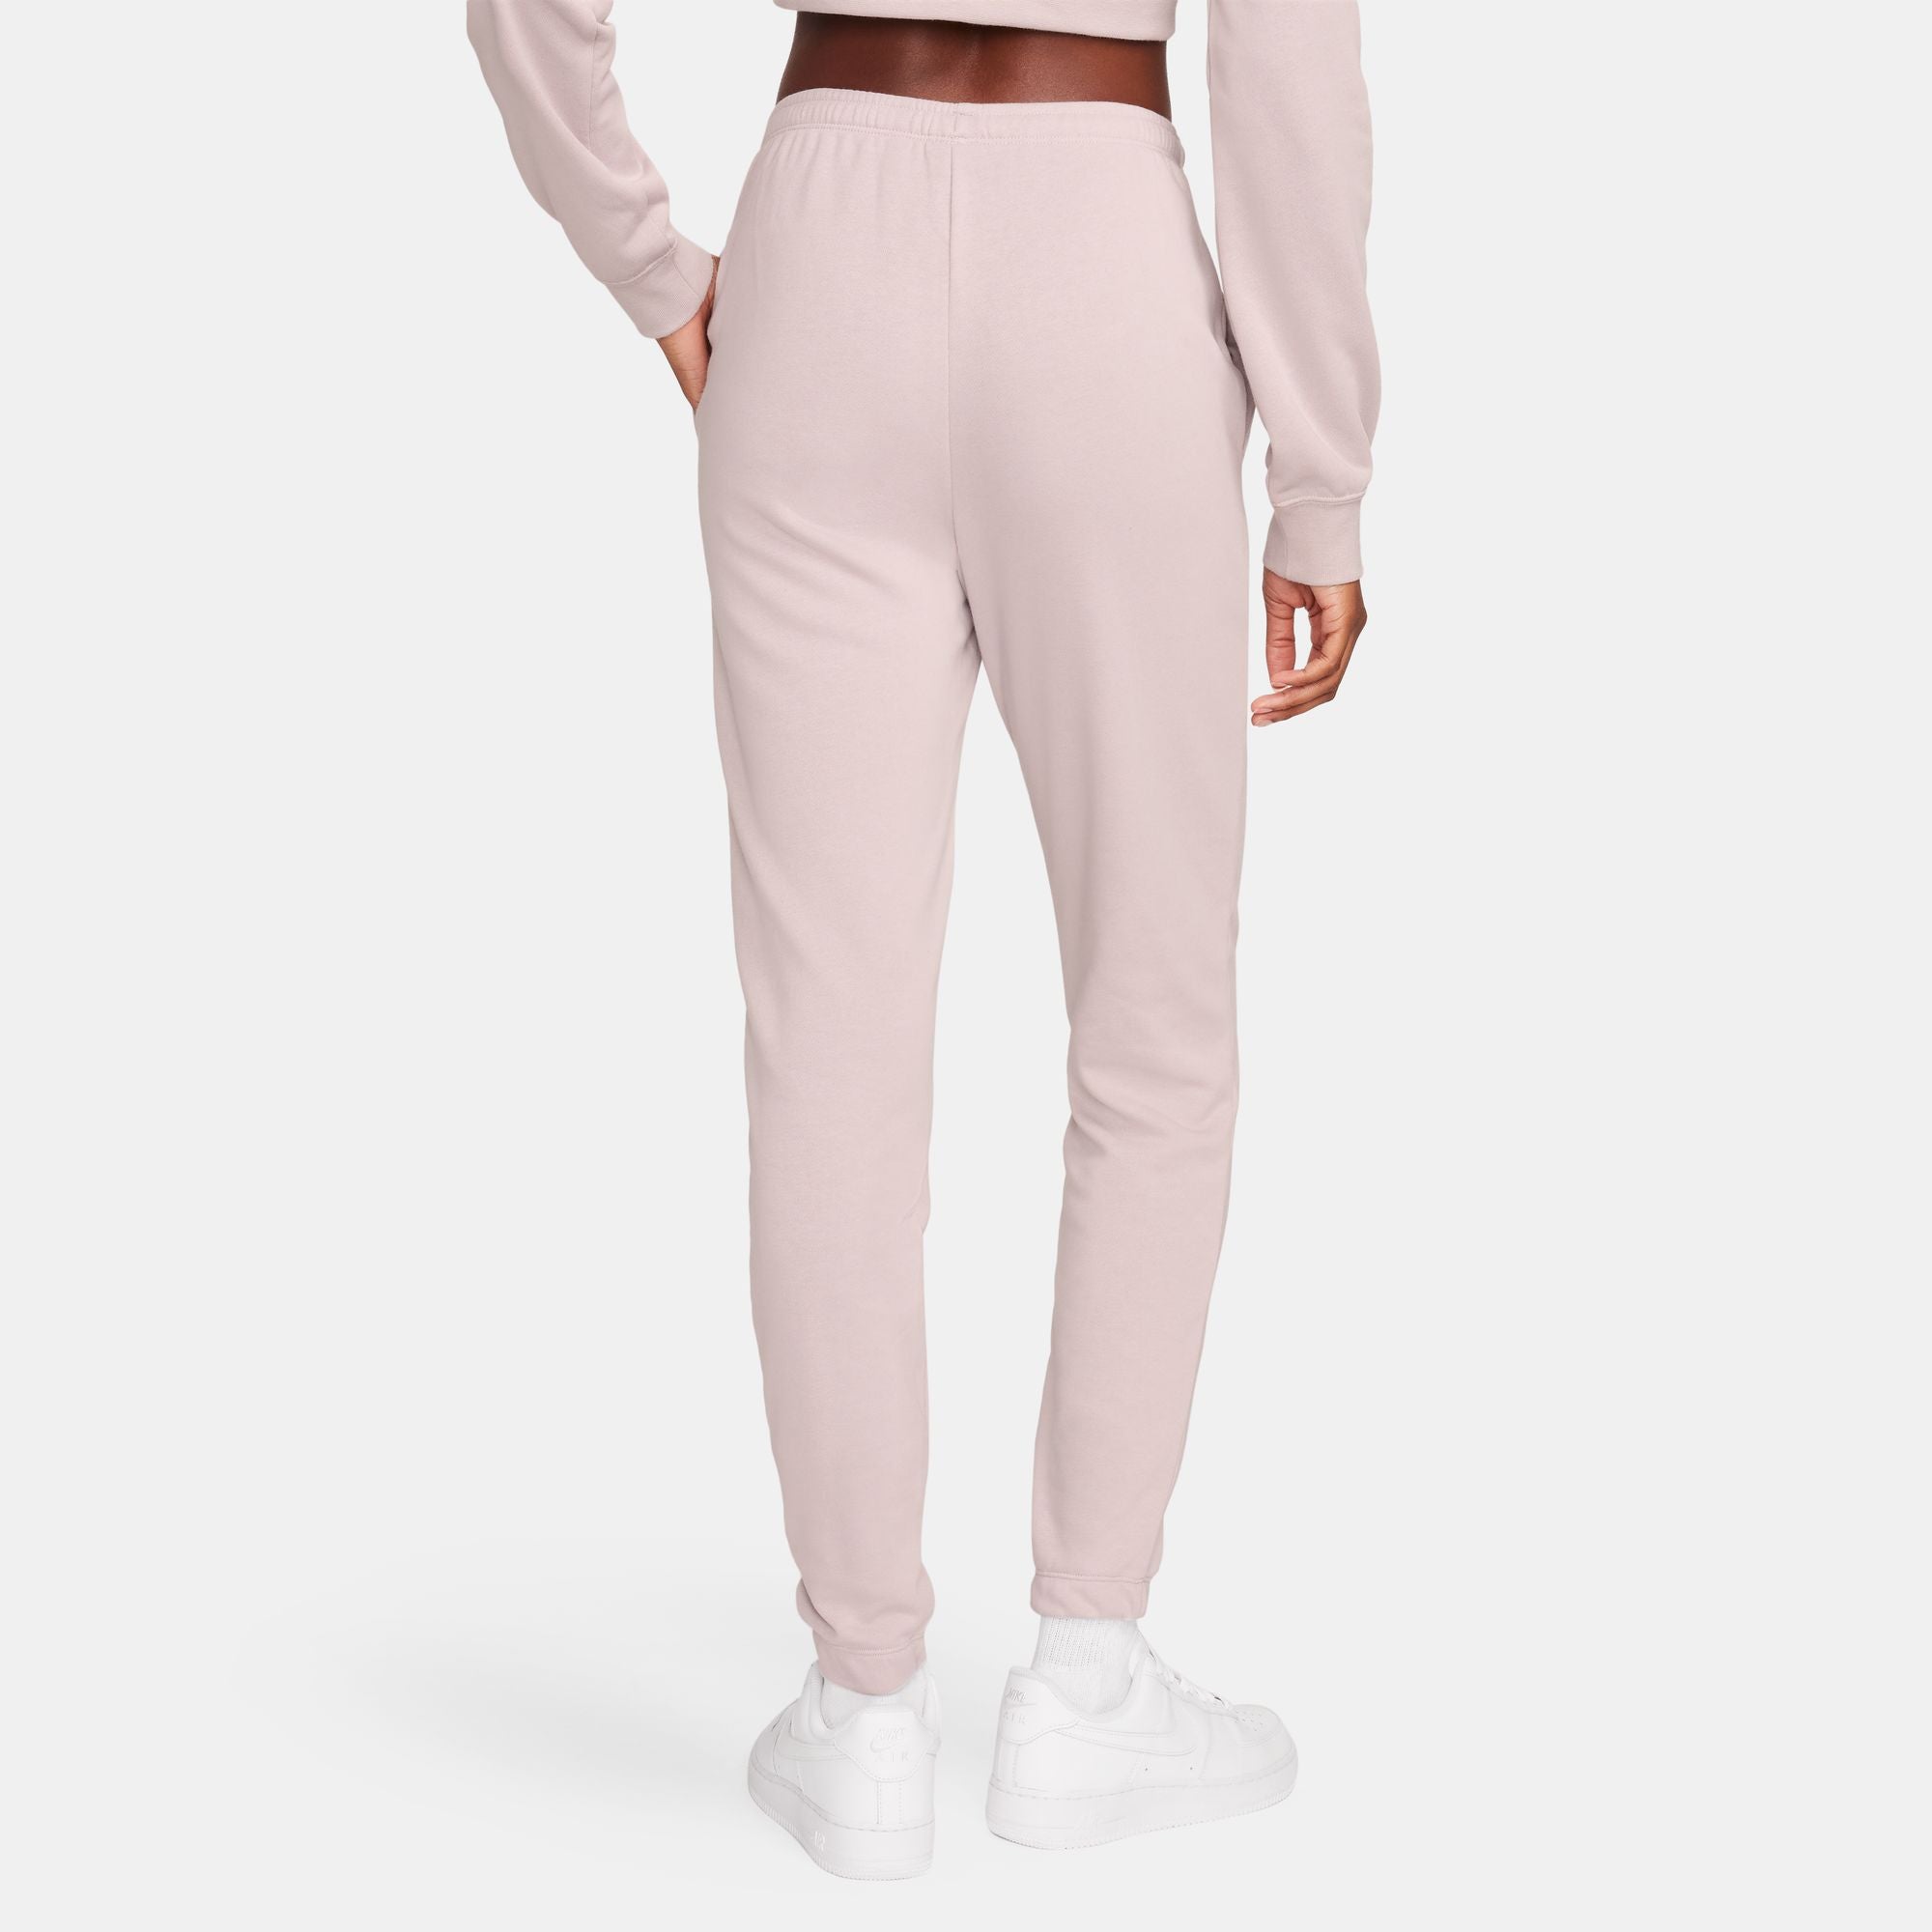 NIKE SPORTSWEAR CHILL TERRY PANT